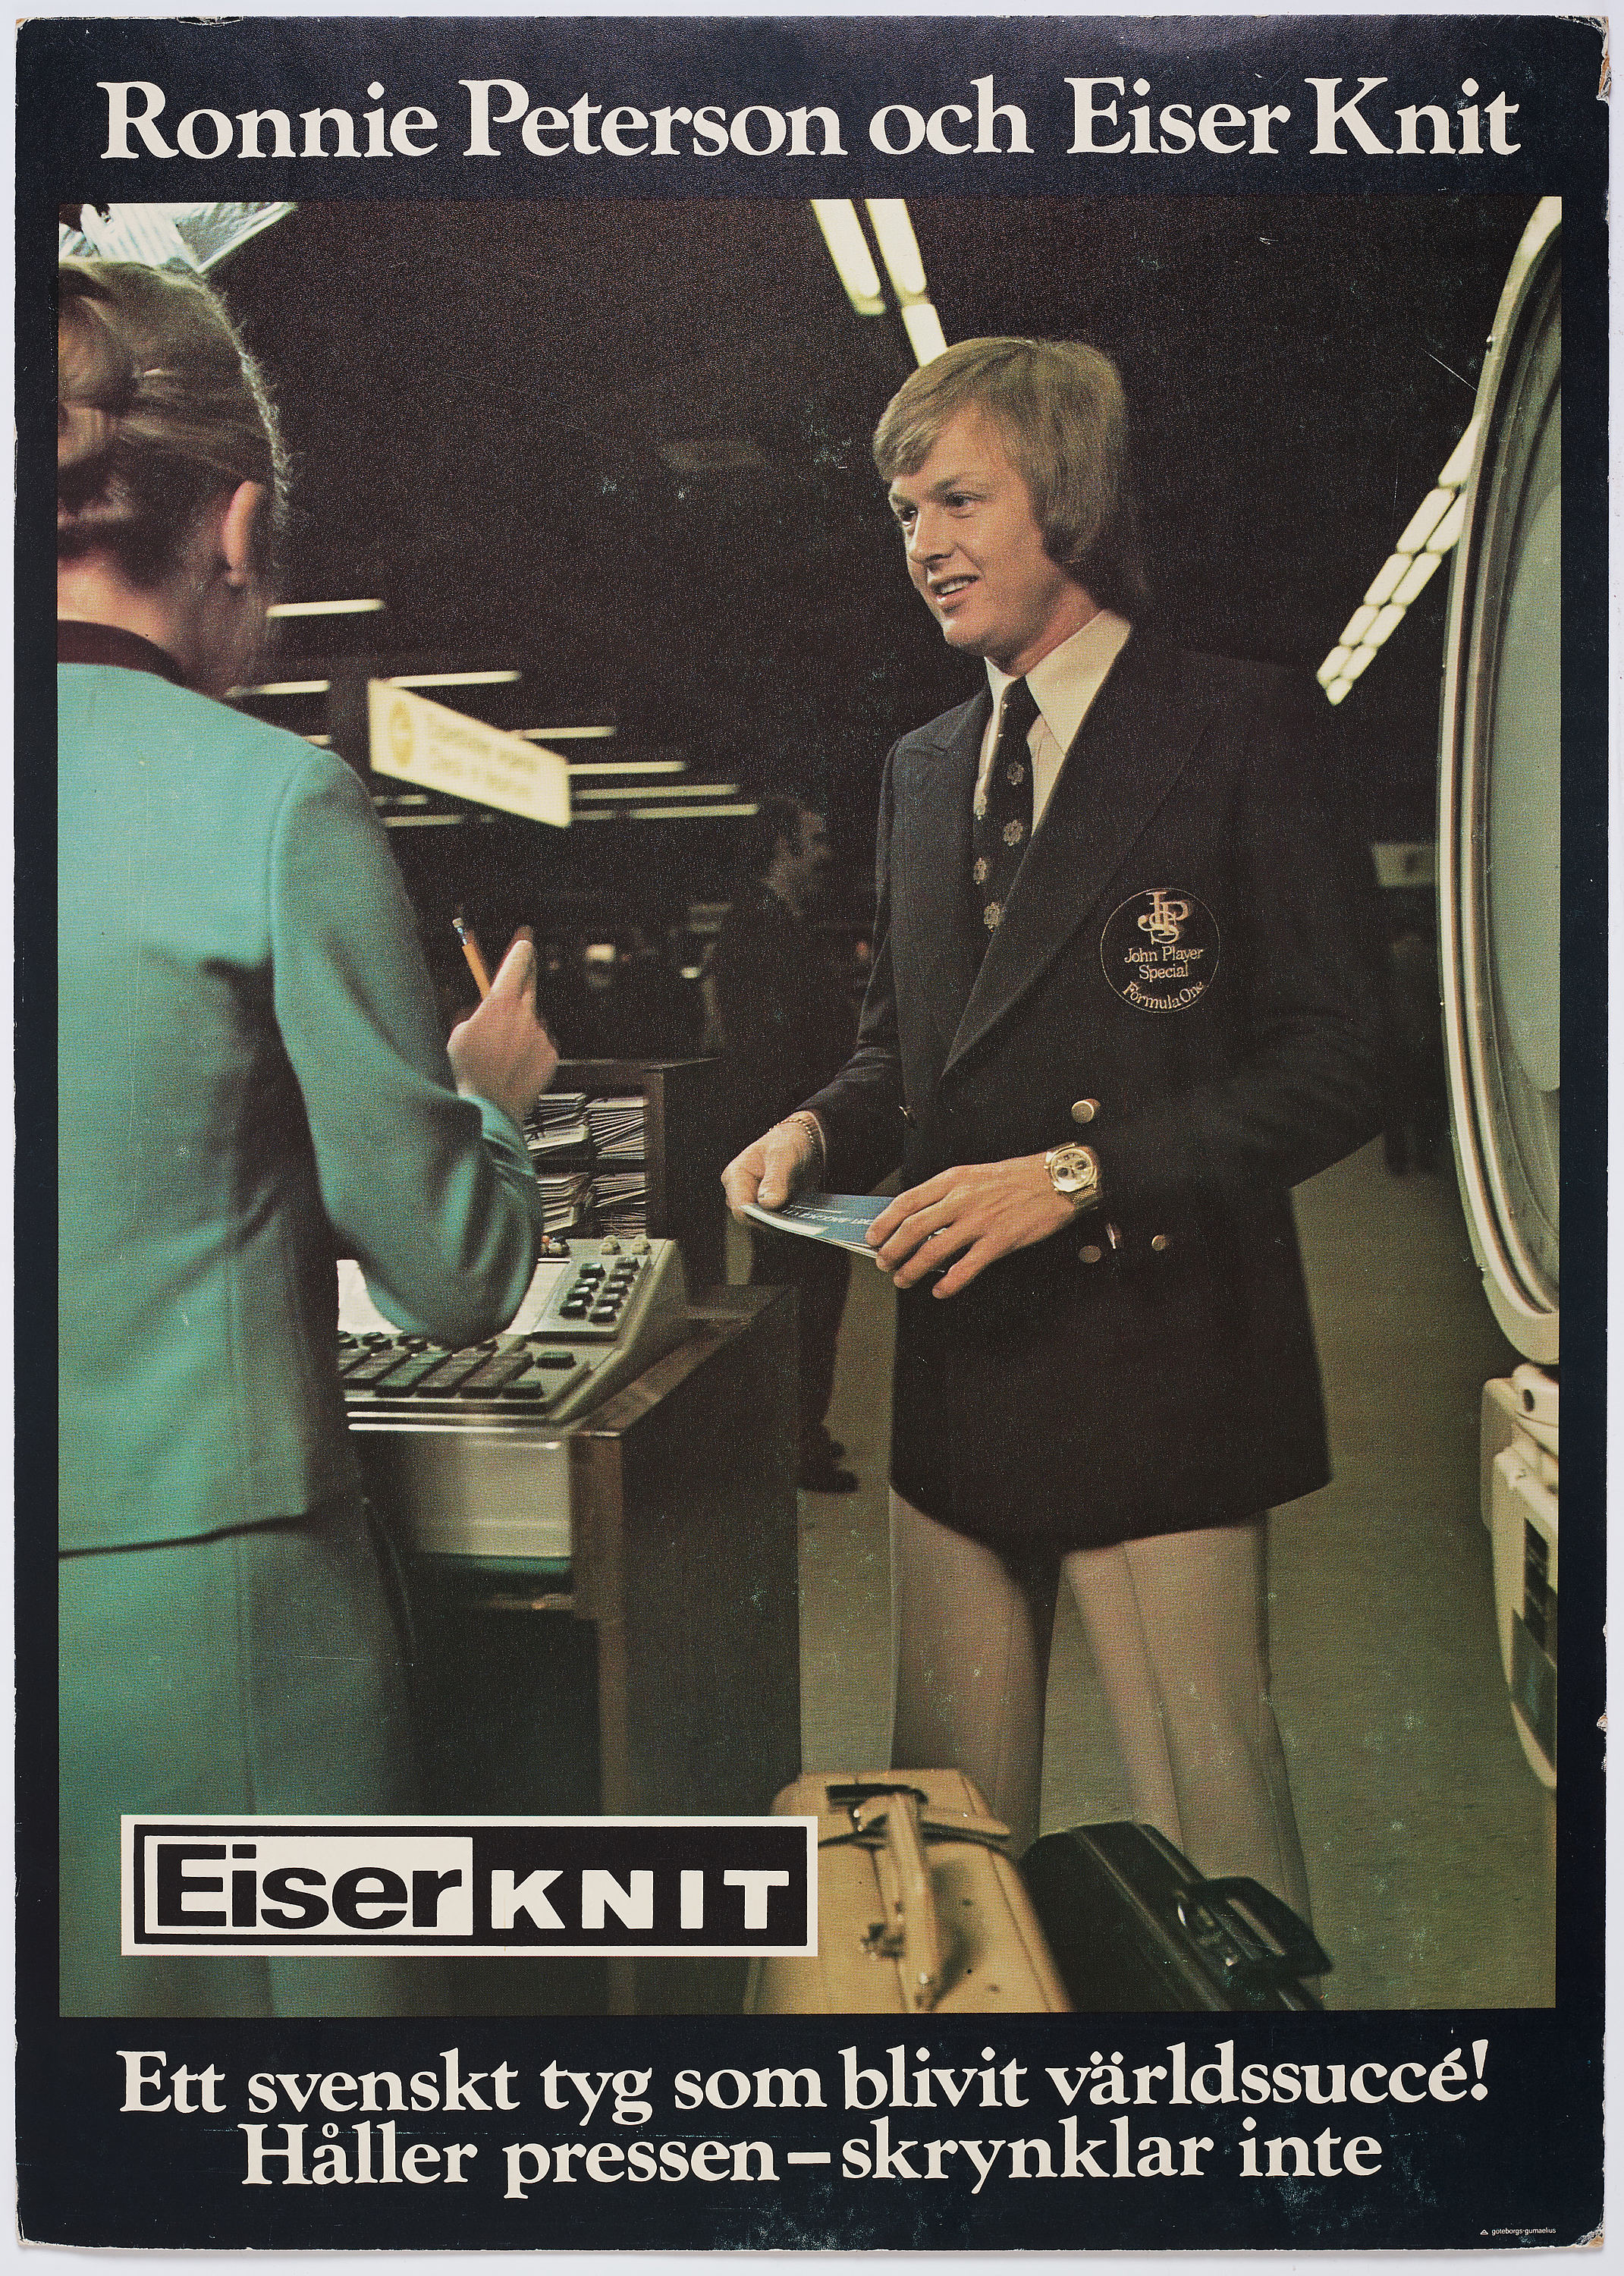 Ronnie Peterson, Lotus, on the cover of a magazine.